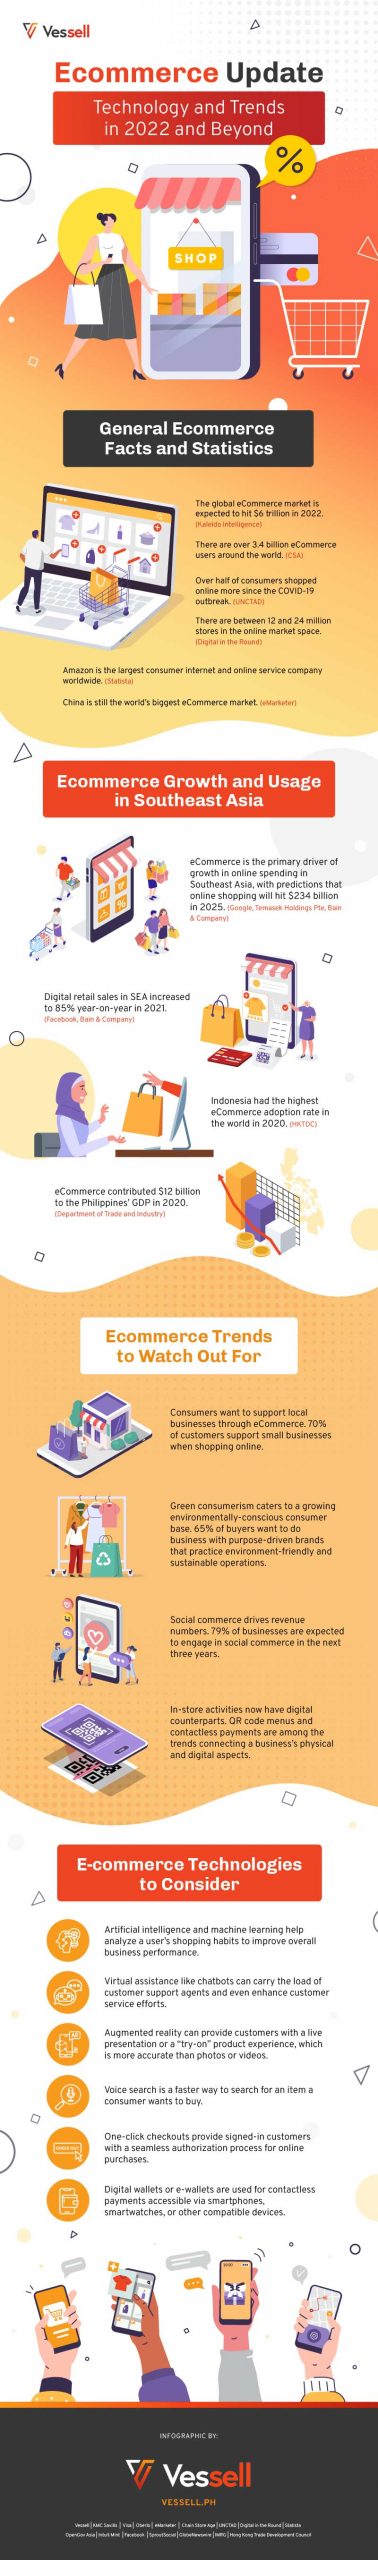 vessell ecommerce update infographic